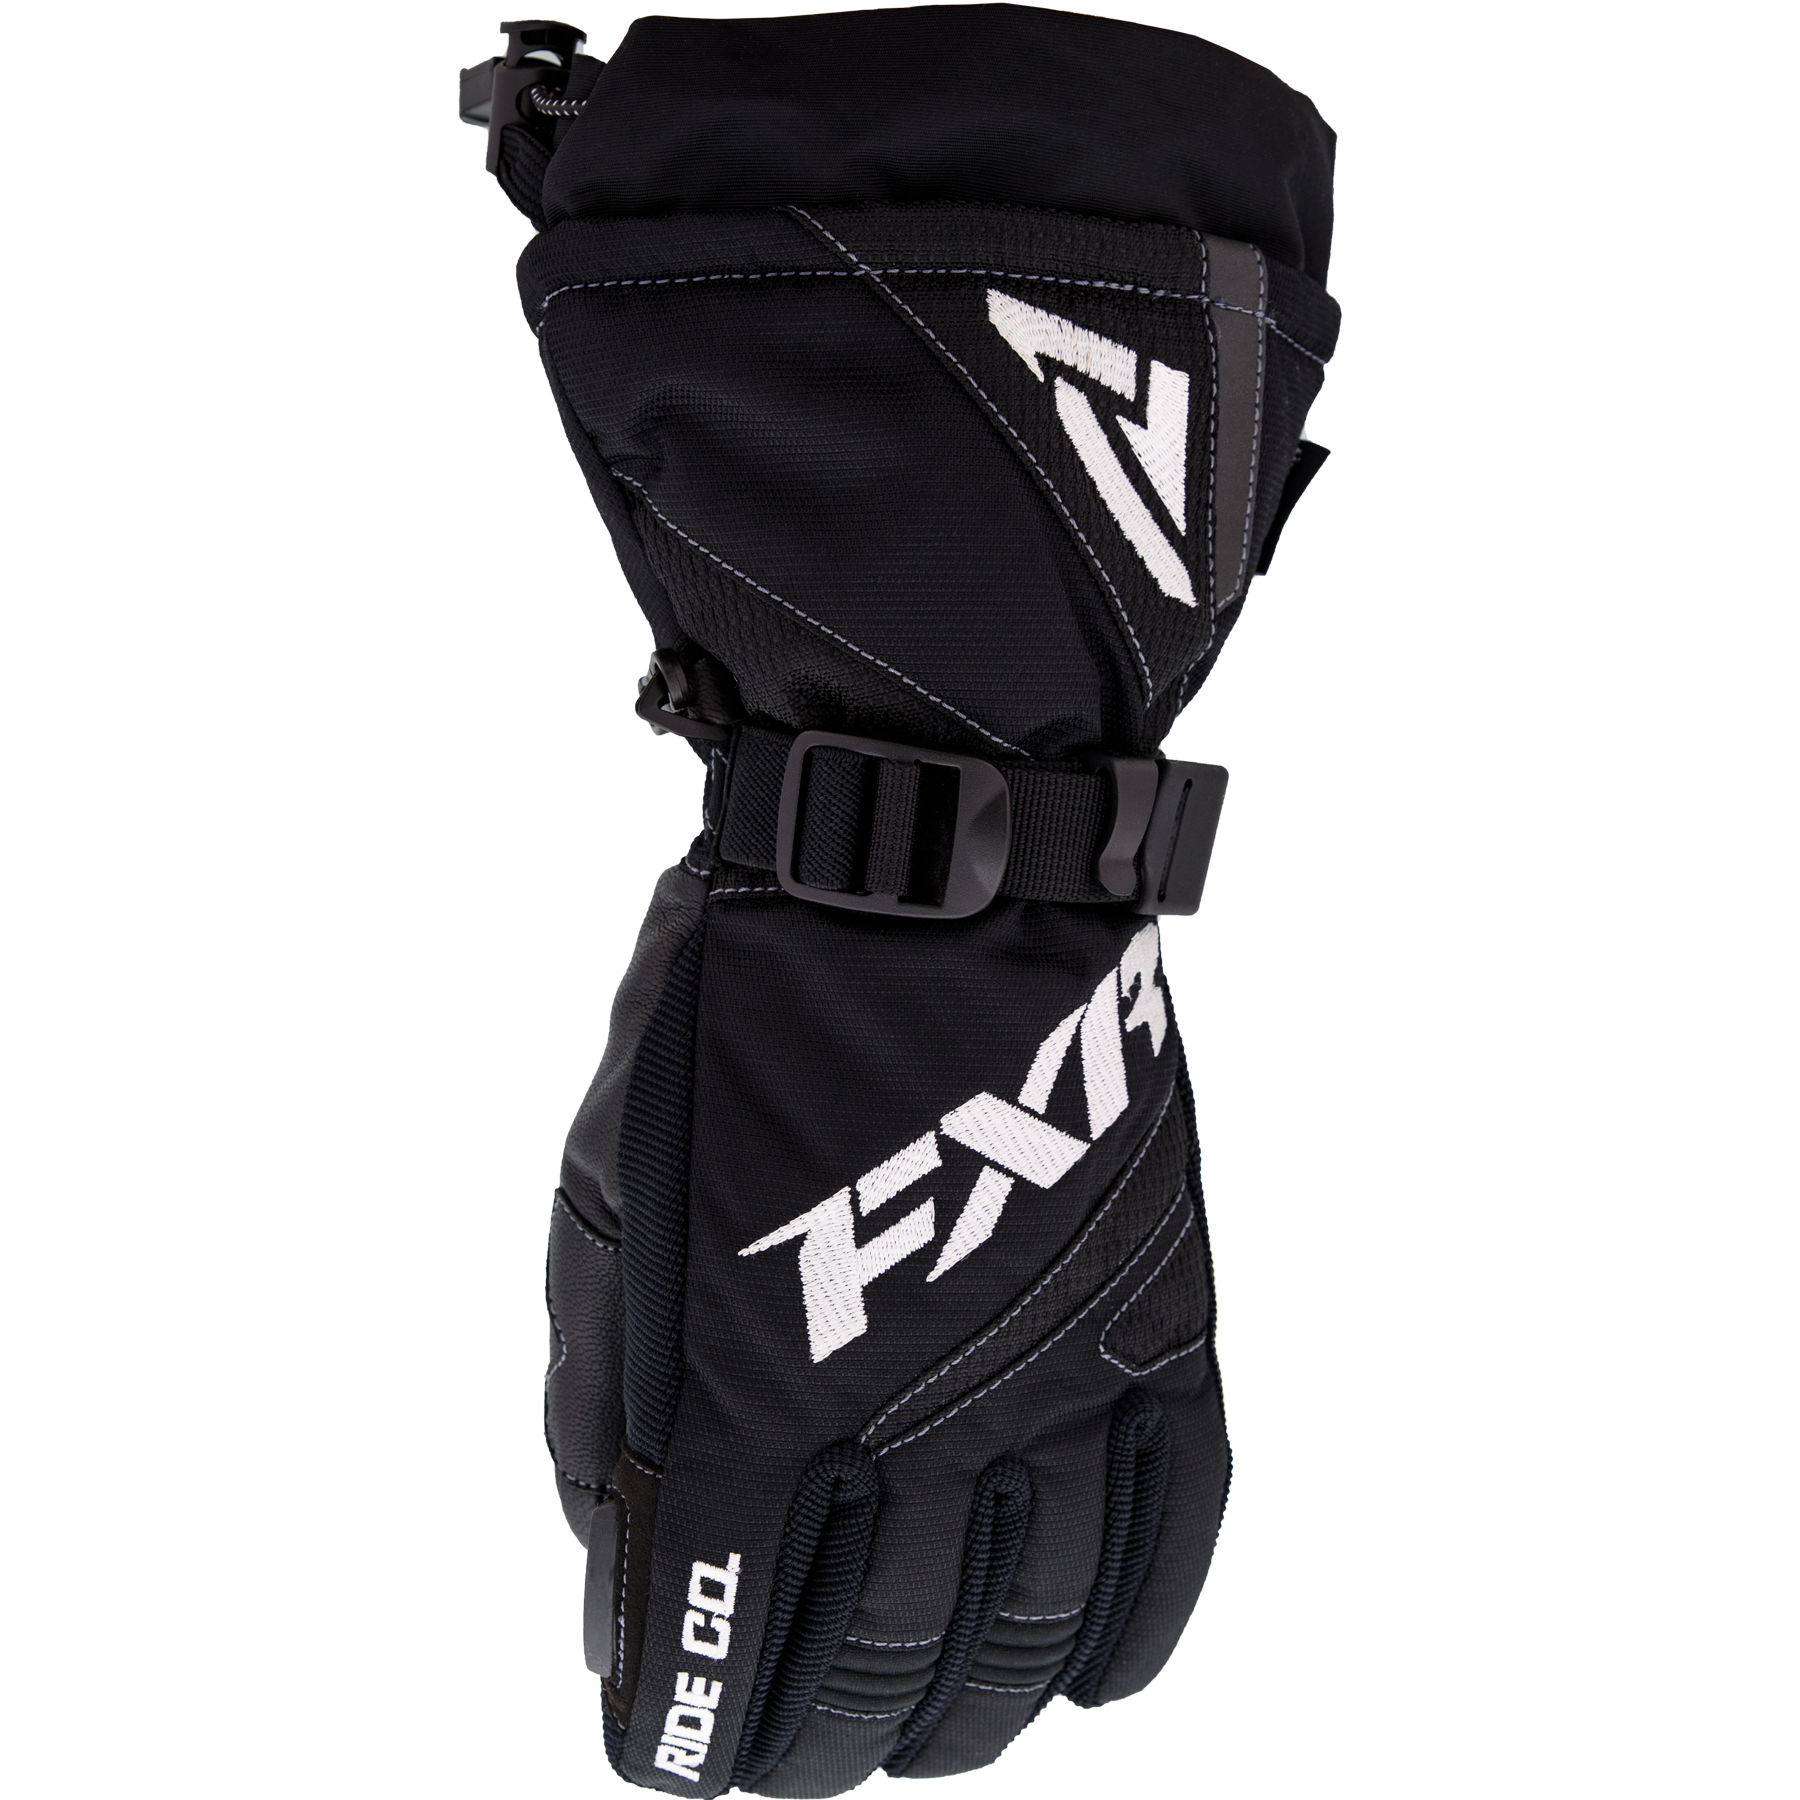 HelixRace_Glove_Ch_Black_220840-_1000_Front.png